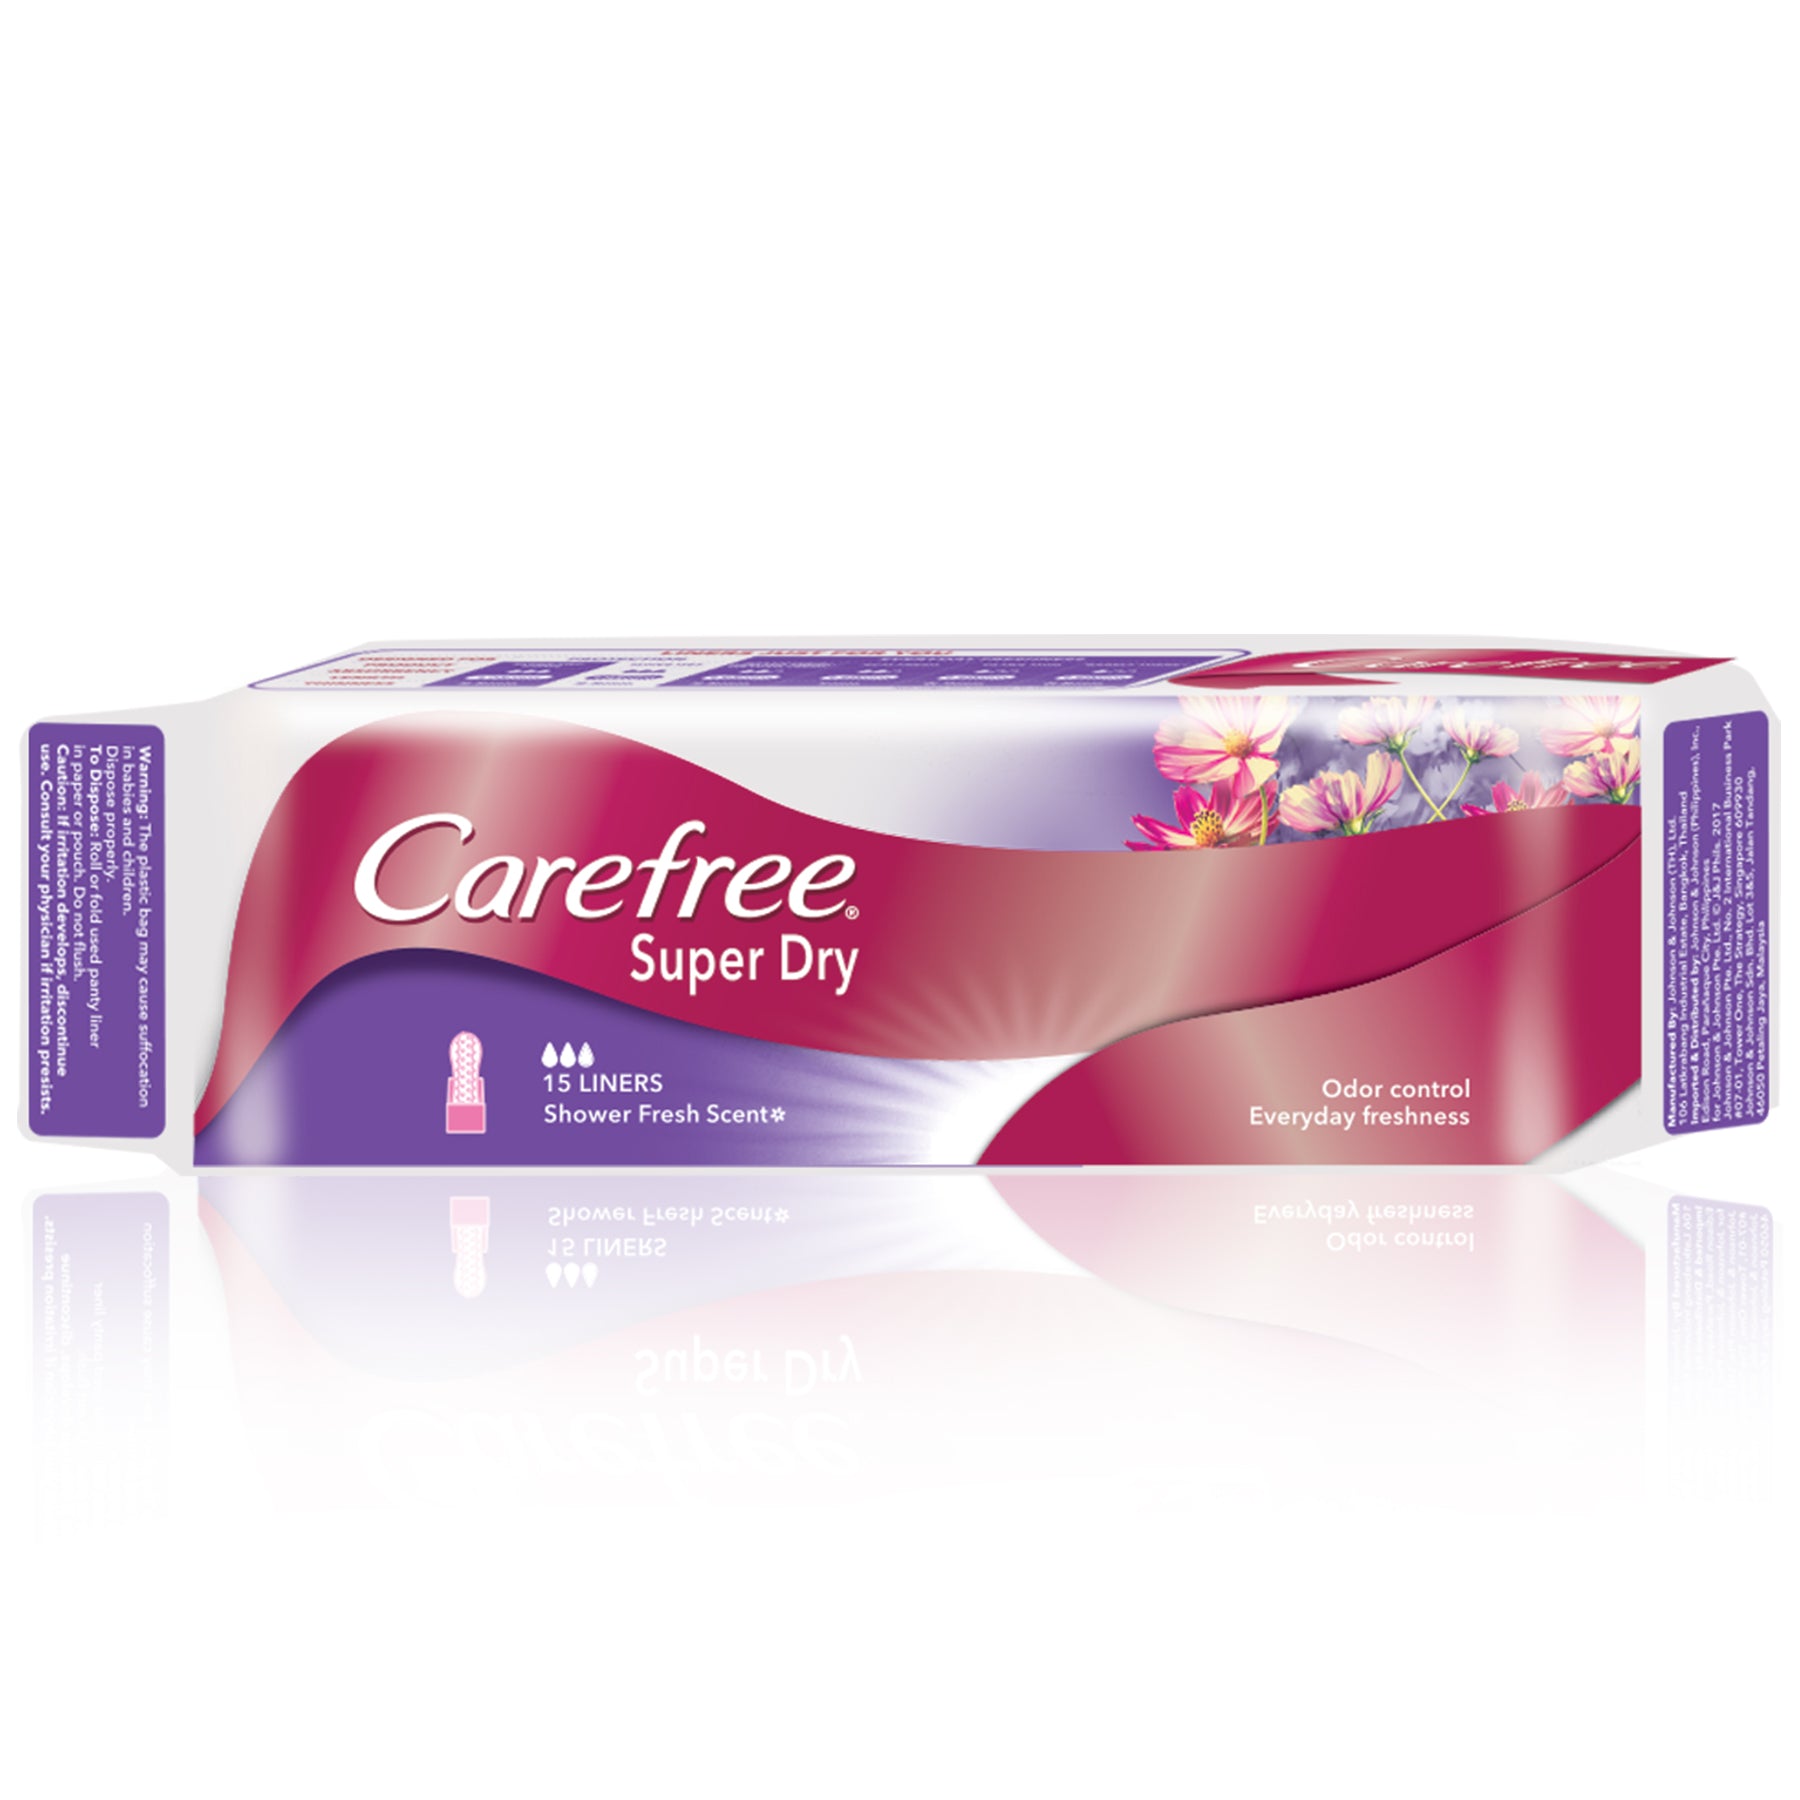 [PANTY LINERS] Carefree Super Dry 15s x 2 Panty Liner